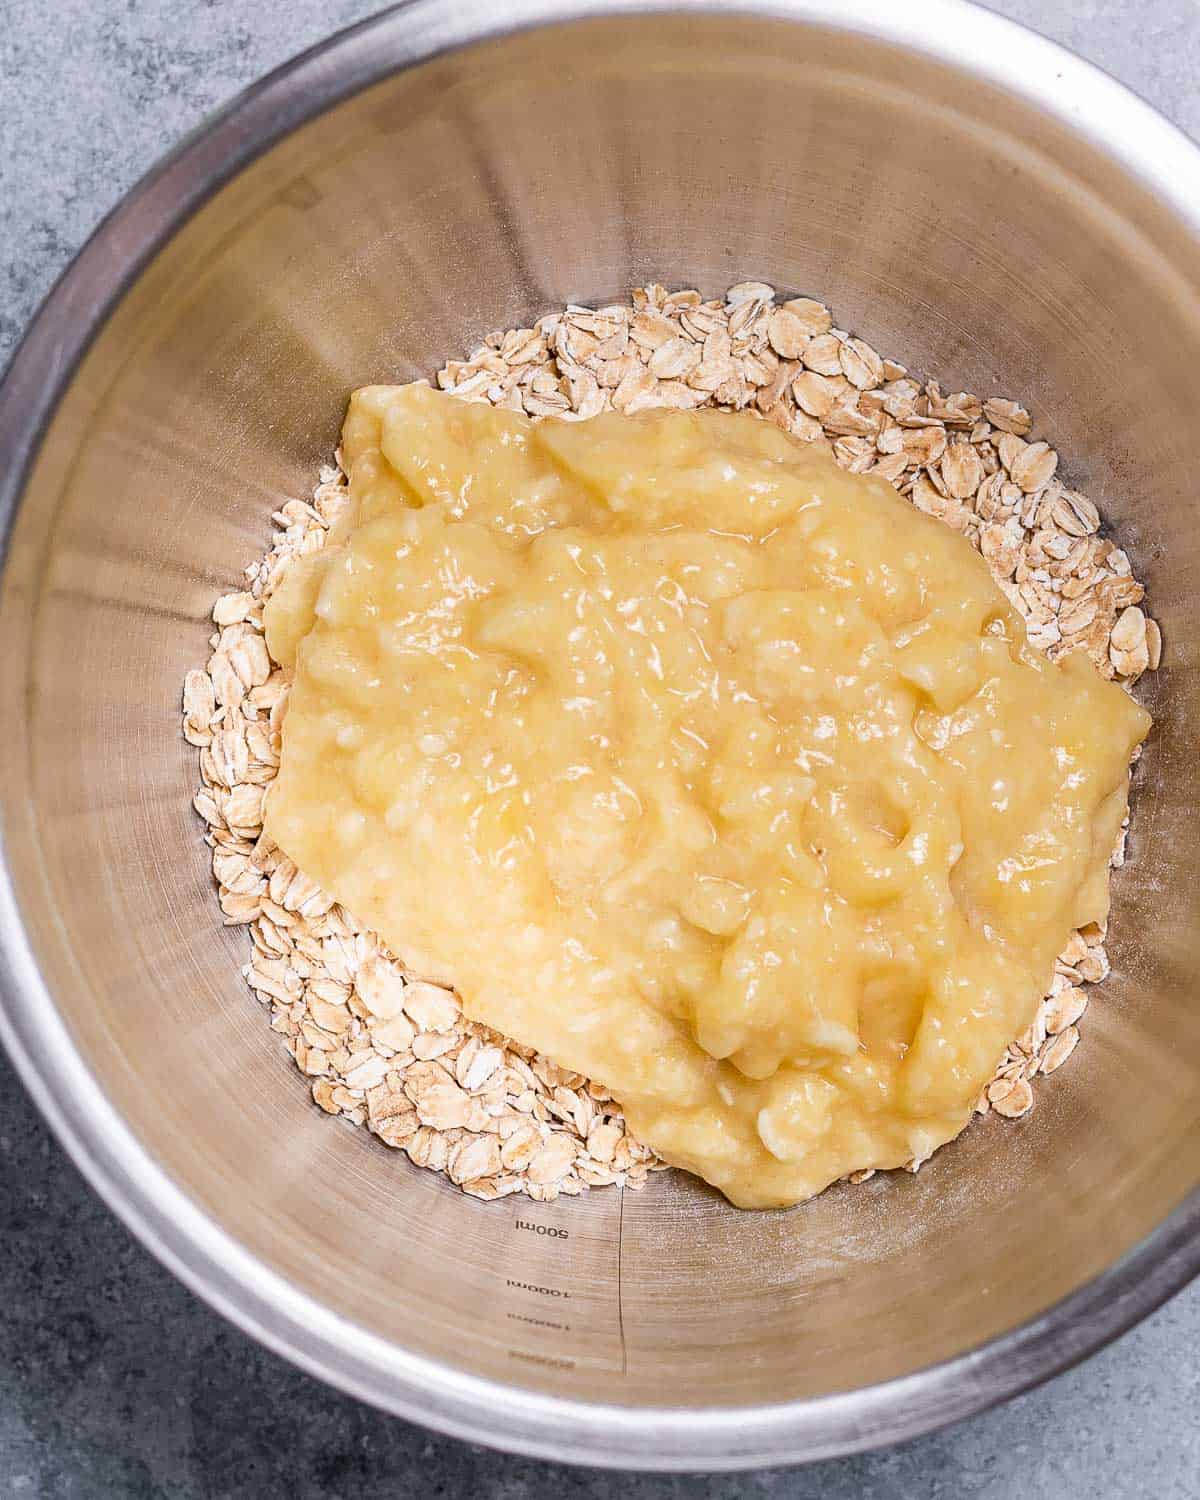 Adding mashed bananas to oats in a large bowl.